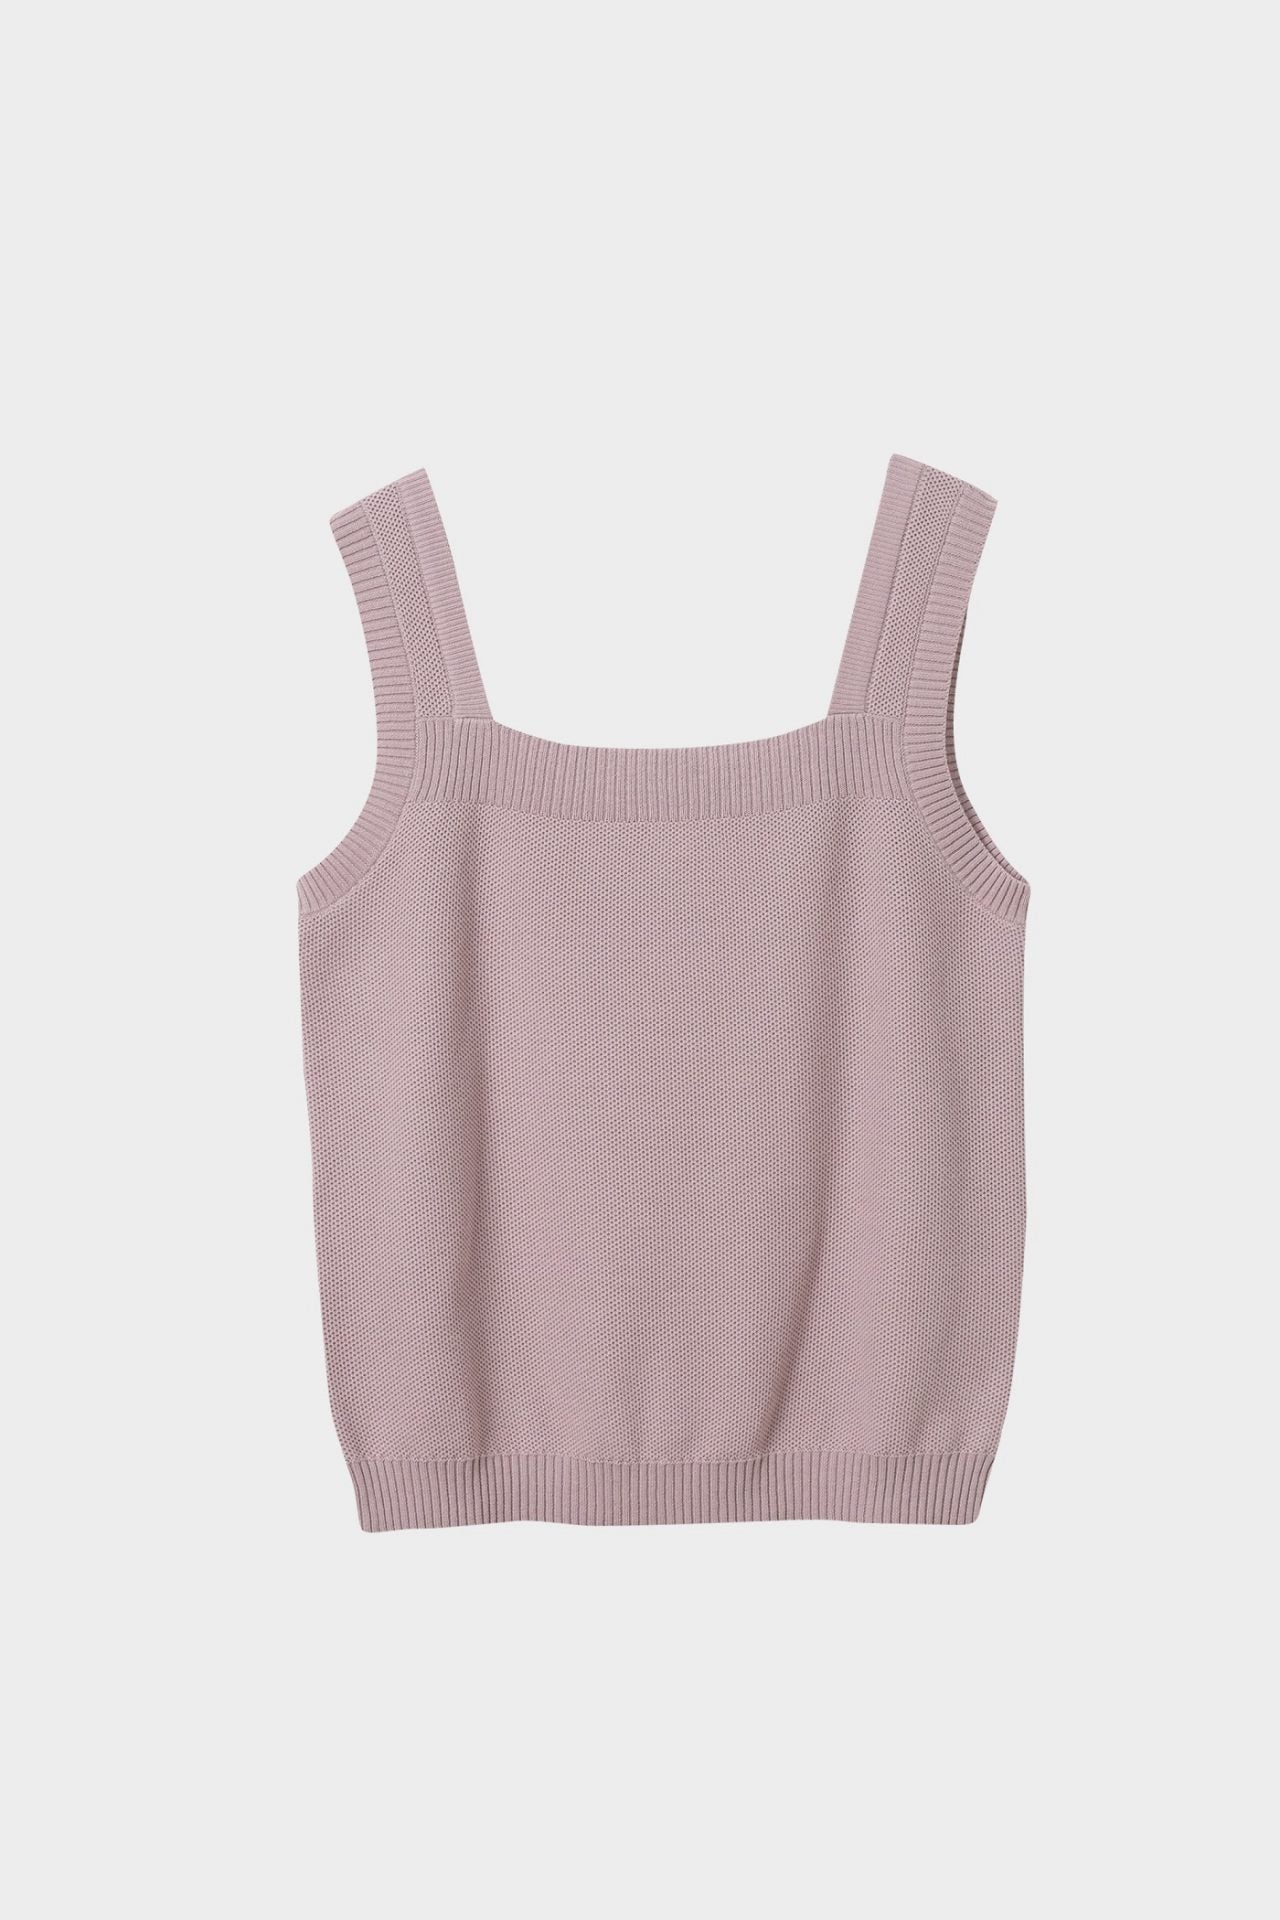 akv 6600 dust pink knit top